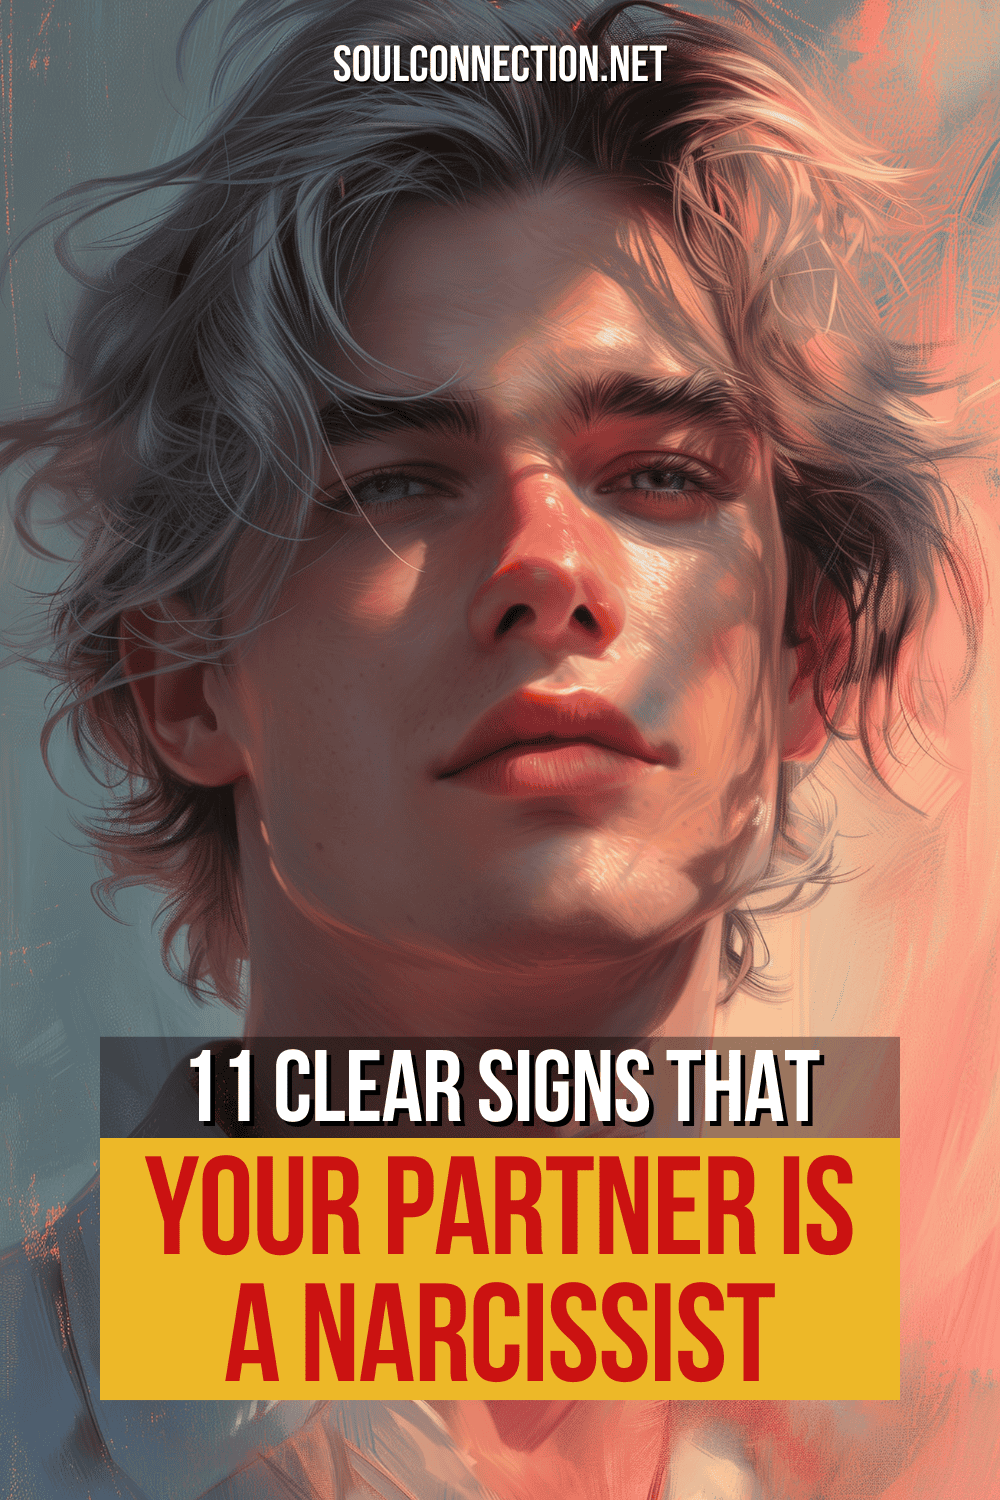 Identify 11 Signs Your Partner Could Be a Narcissist.